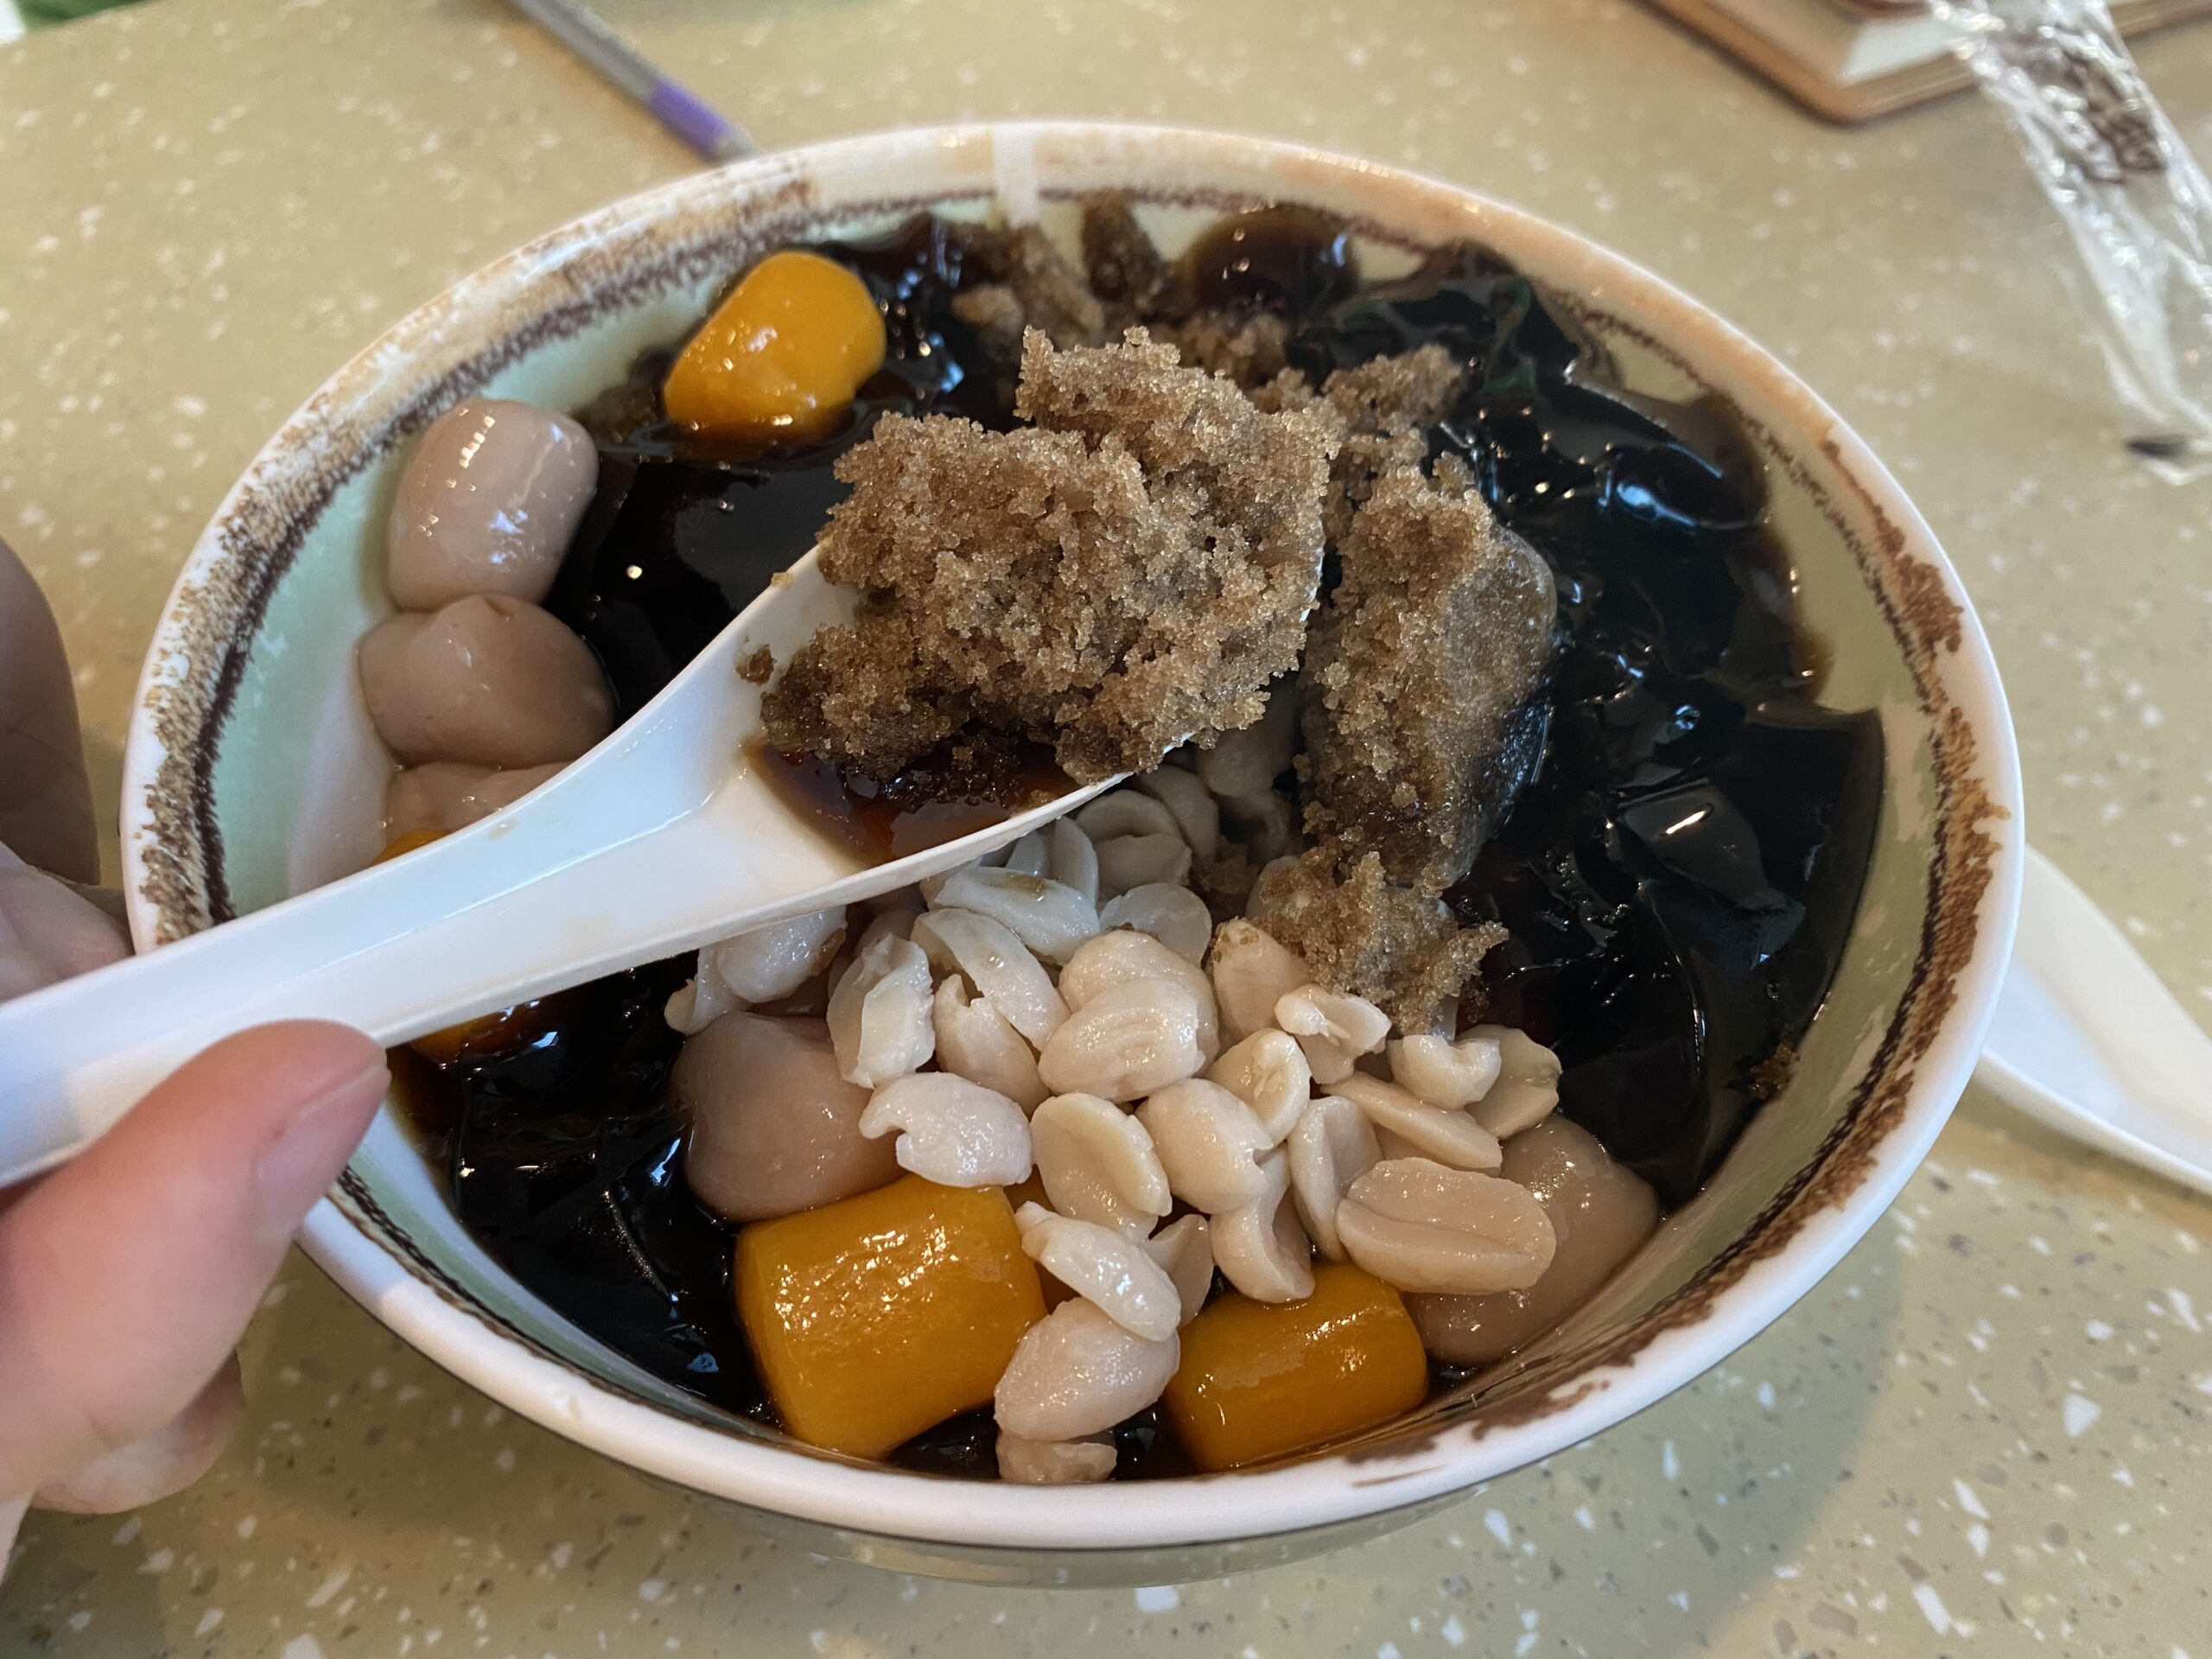 A spoon scoop up the colorful, gelatinous textured icy grass jelly treat from Meet Fresh.